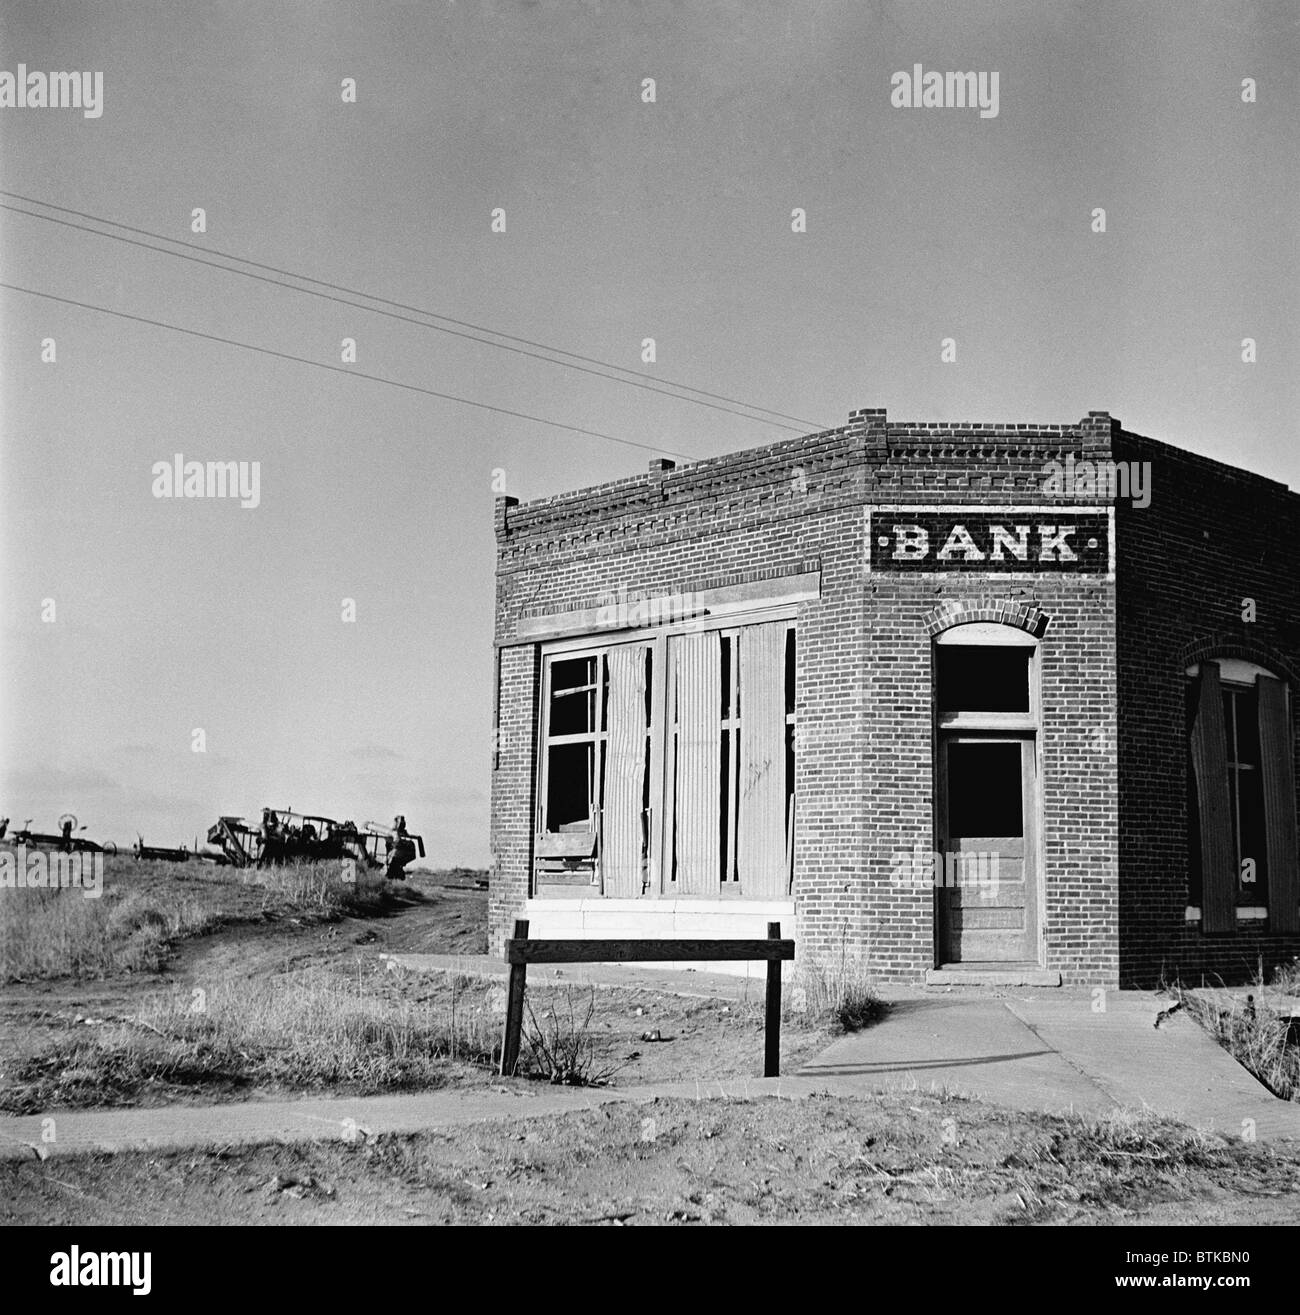 The Emergecy Banking Act of 3/9/1933, signed during the first week of FDR's presidency, temporarily closed down insolvent banks, and their reopening federal auditors determined them to be sound. One third of the country's banks, mostly local concerns, were not able to reopen, dotting the Great Depressin landscape with abandoned bank buildings. May 1936 photo by Arthur Rothstein. Stock Photo